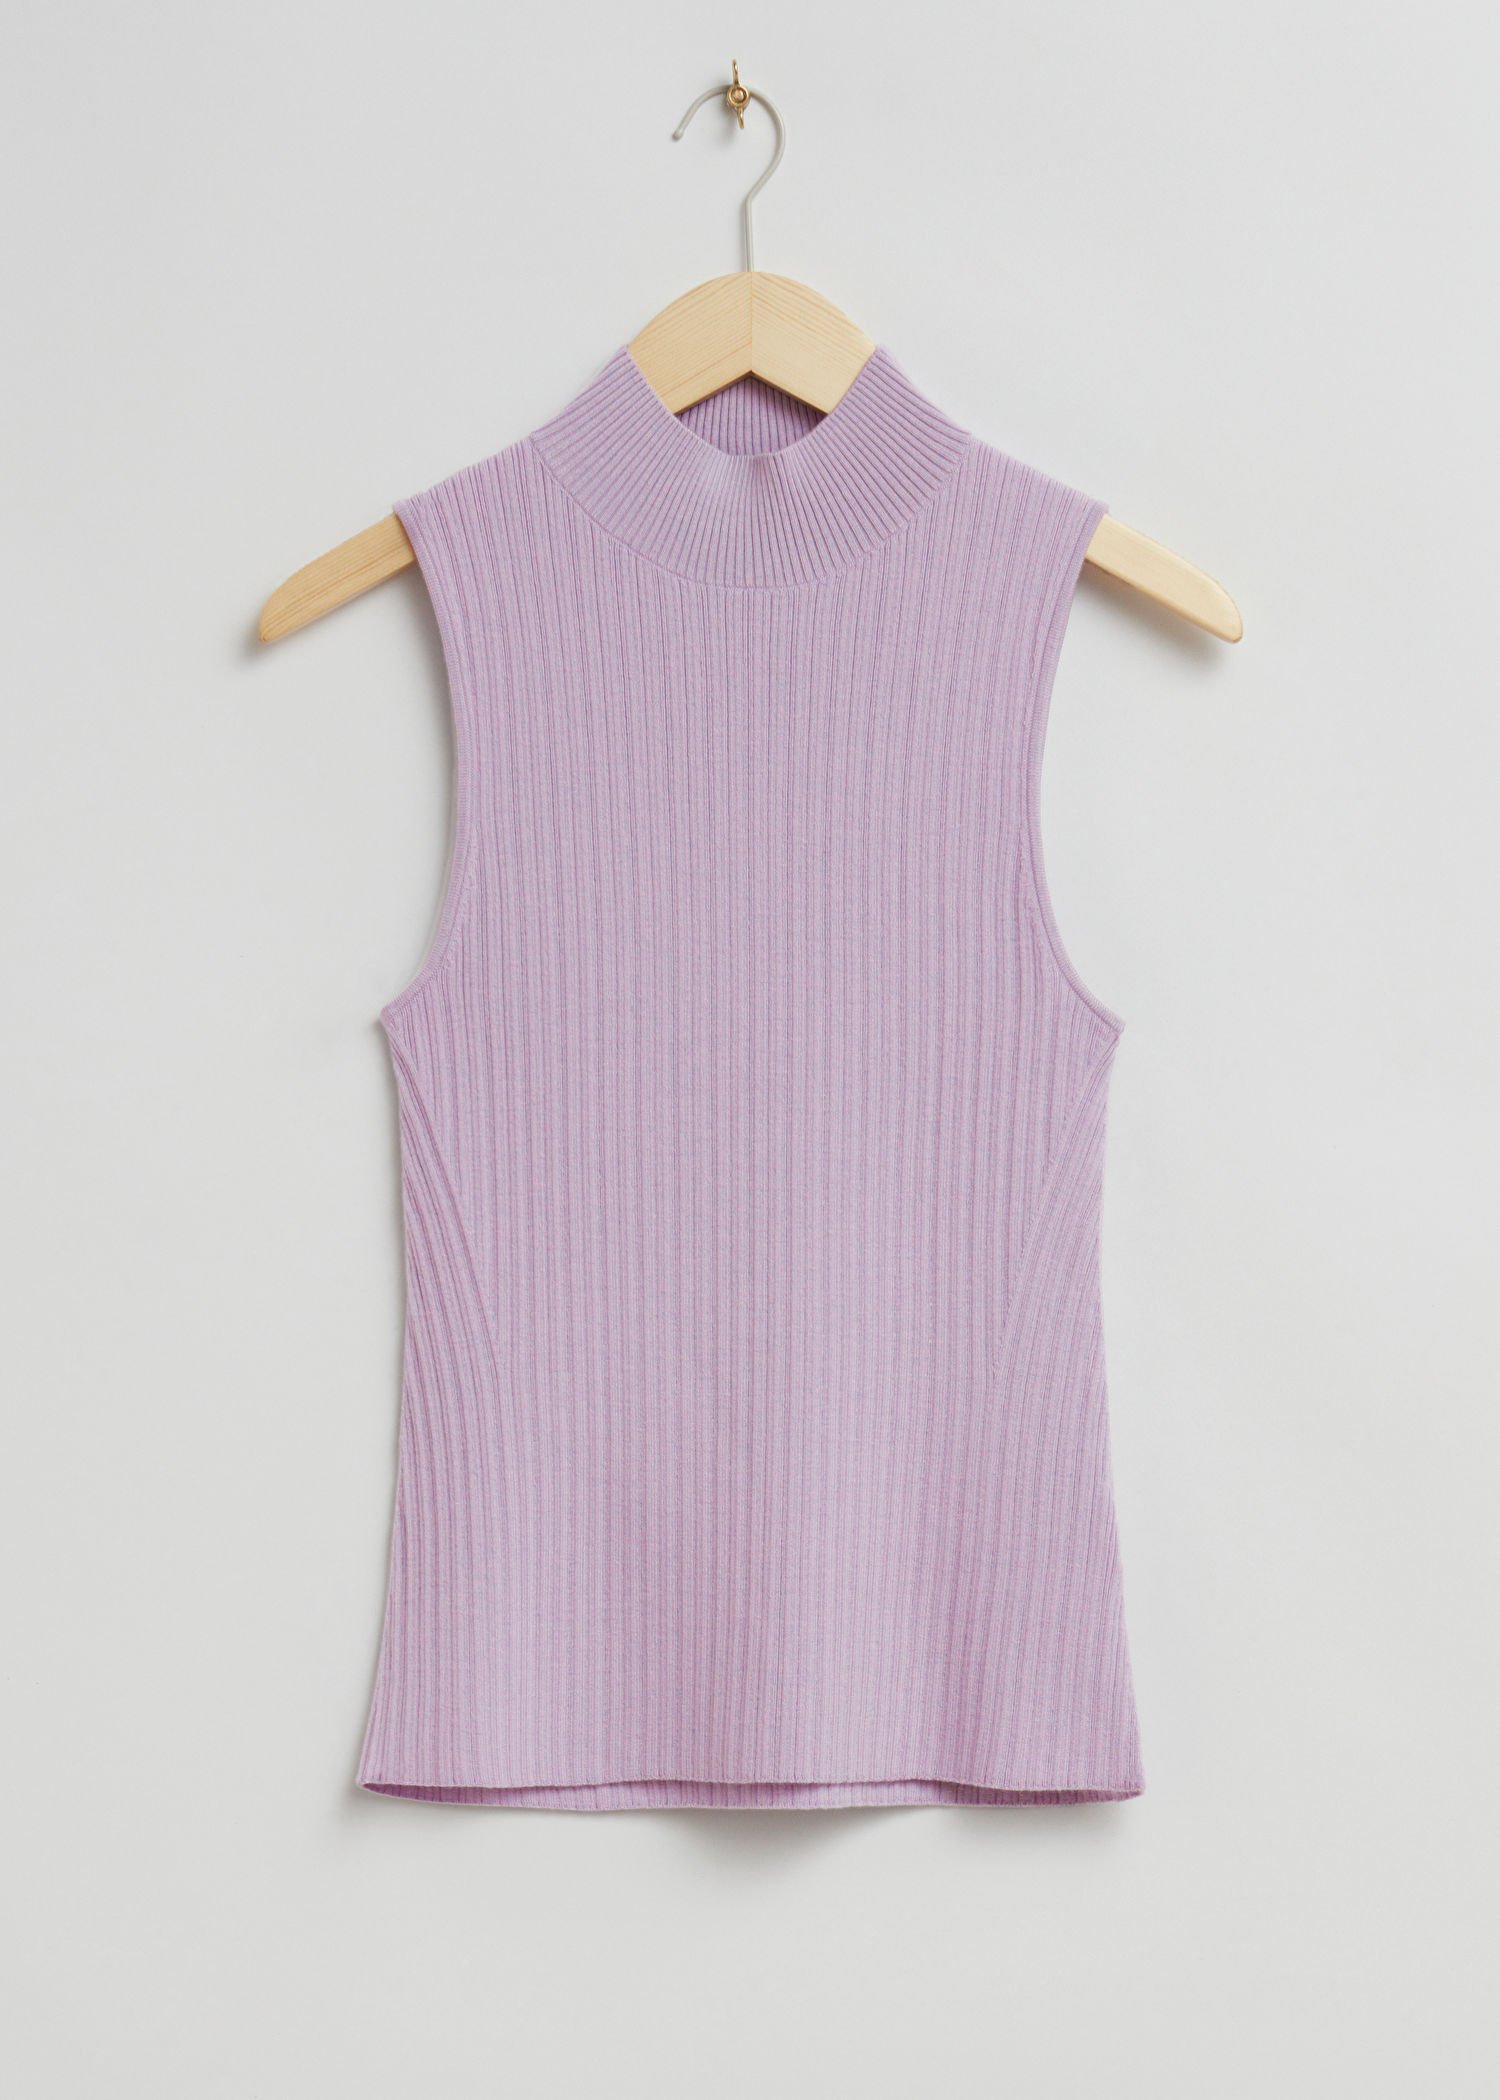  OTHER STORIES Sleeveless Mock Neck Ribbed Top in Lilac